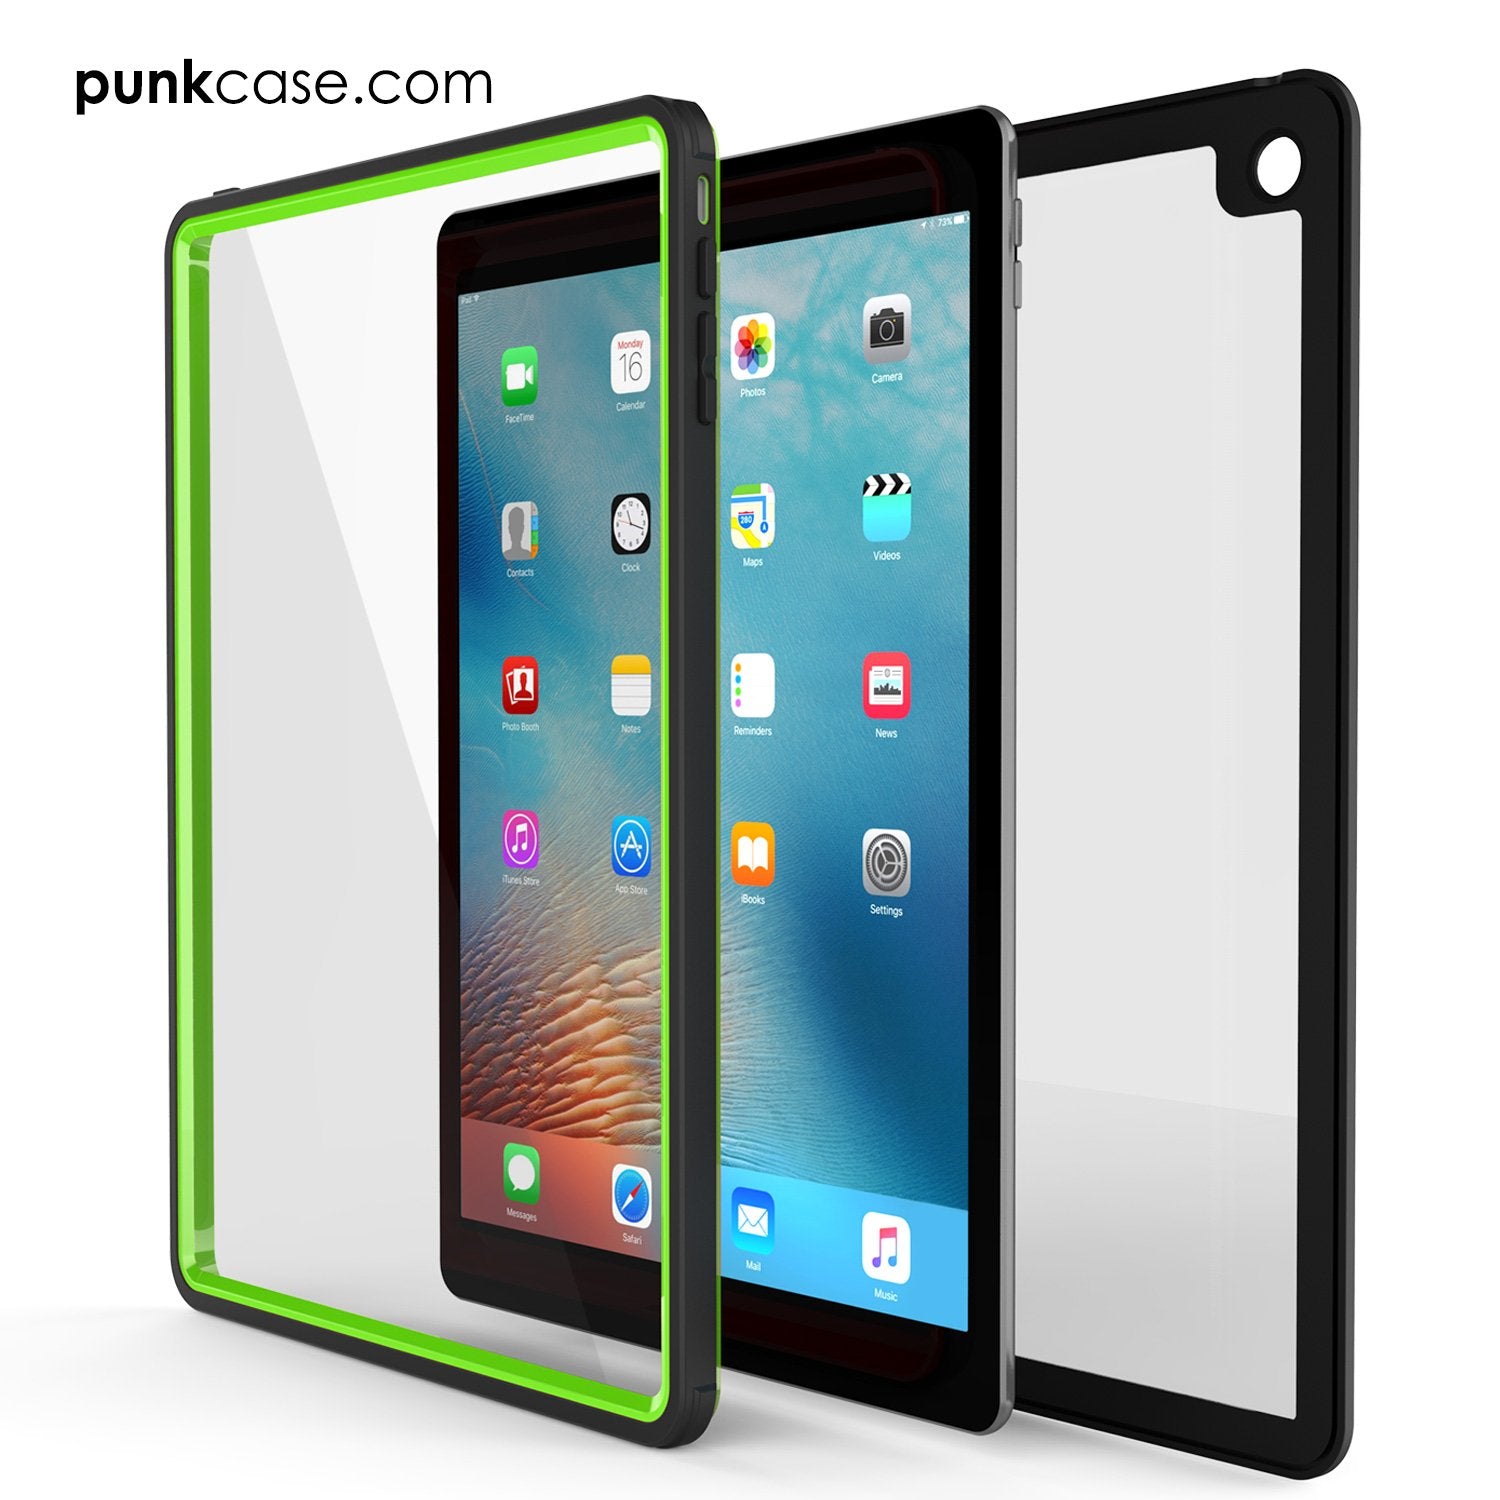 Punkcase iPad Pro 9.7 Case [CRYSTAL Series], Waterproof, Ultra-Thin Cover [Shockproof] [Dustproof] with Built-in Screen Protector [Light Green]